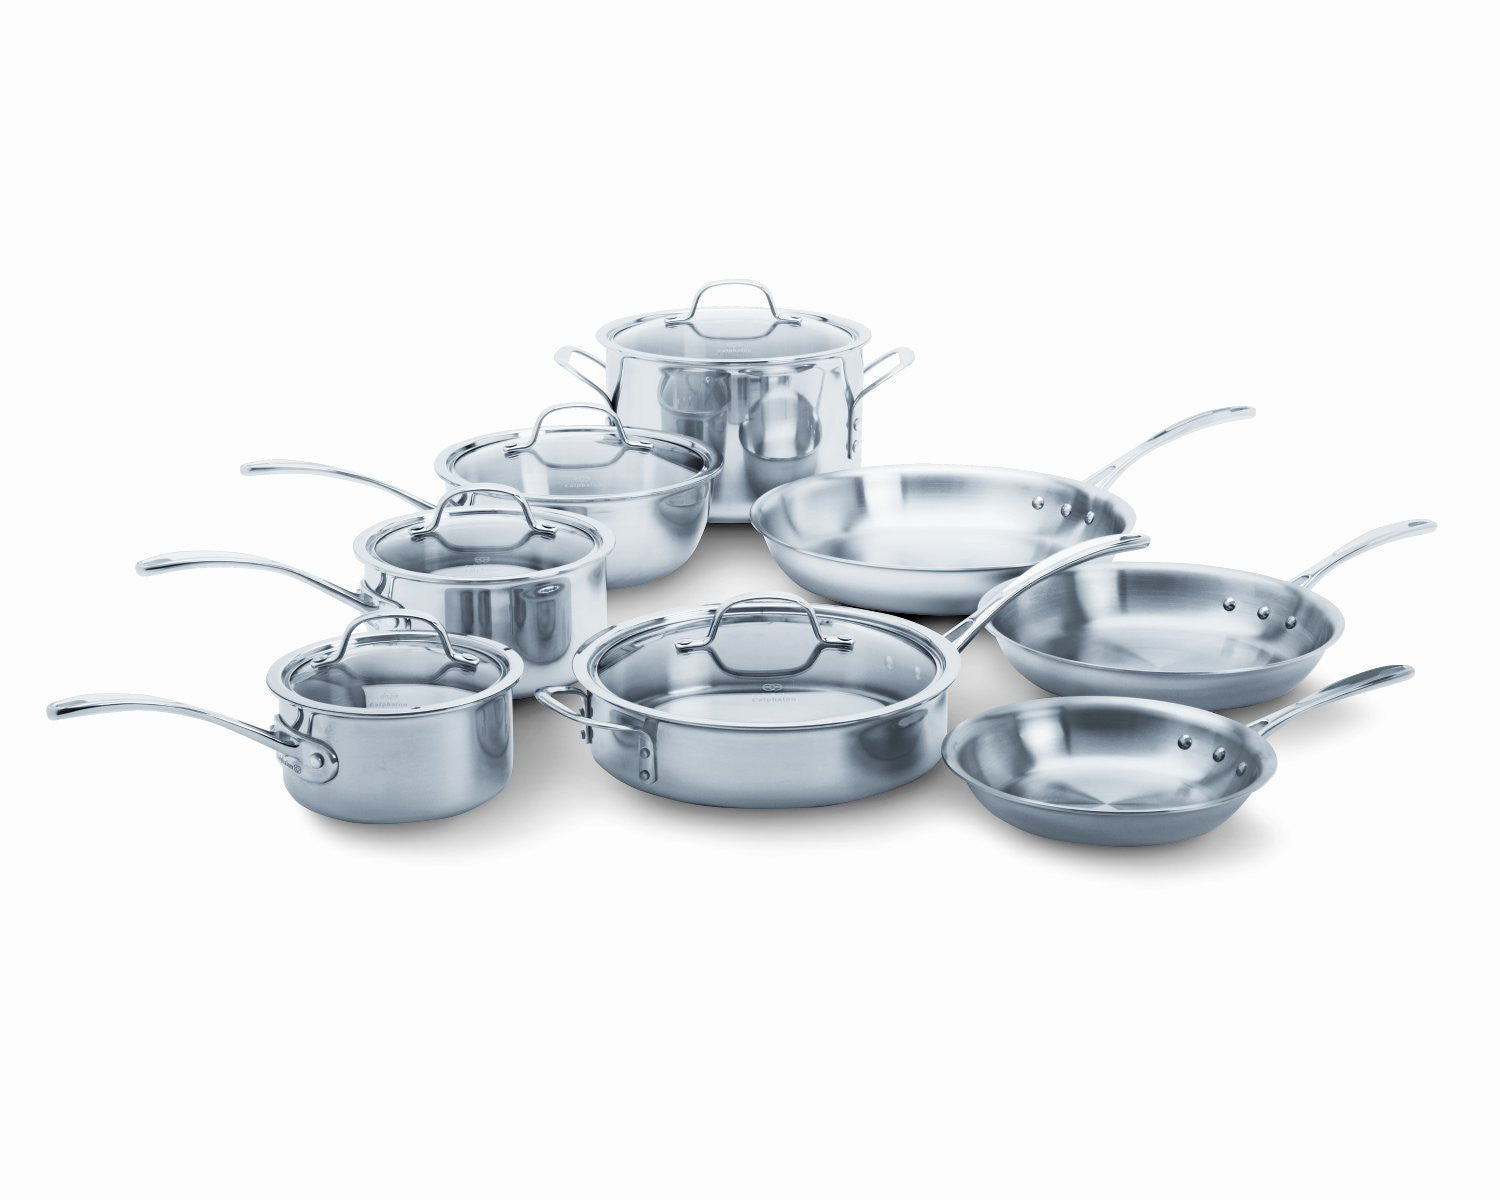 New Calphalon Tri-Ply Stainless Steel 13-Piece Cookware Set for Sale in  Cornelius, NC - OfferUp